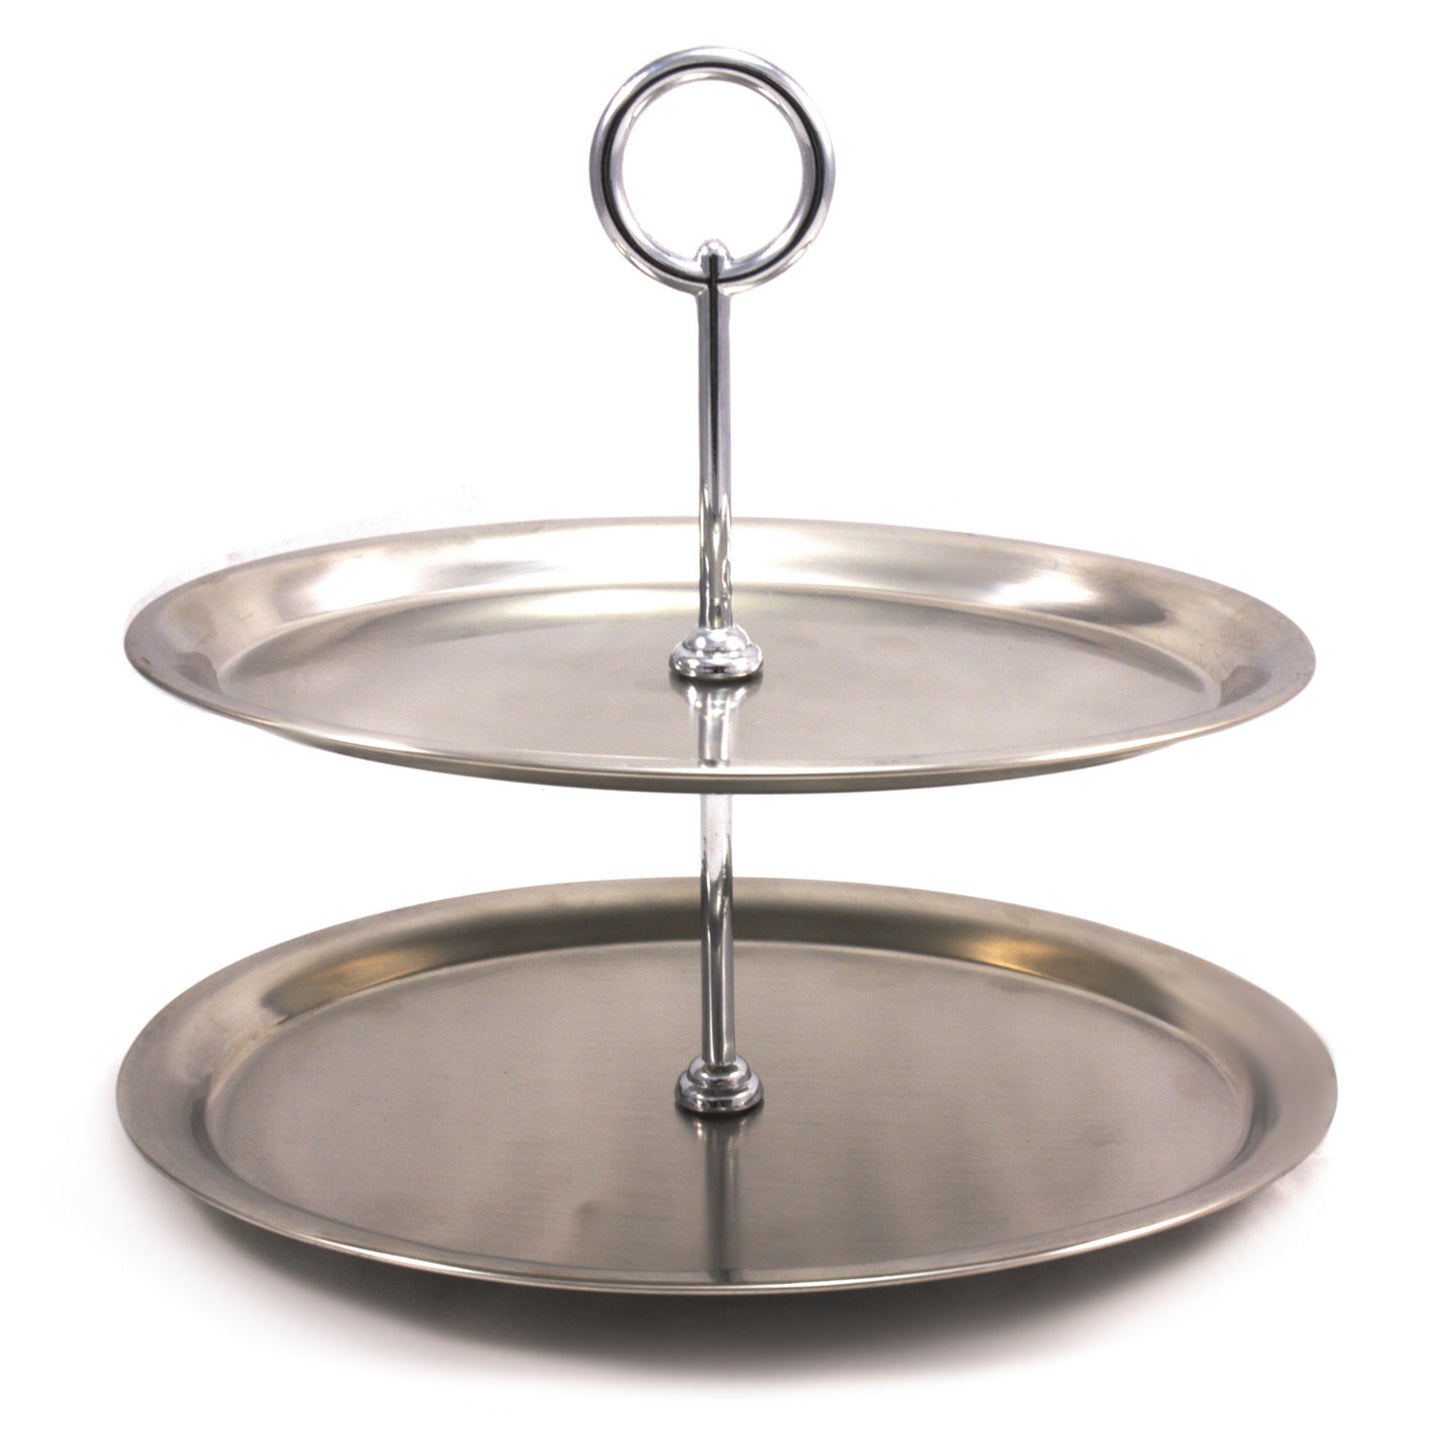 2 Tier Stainless Steel Cup Cake Stand